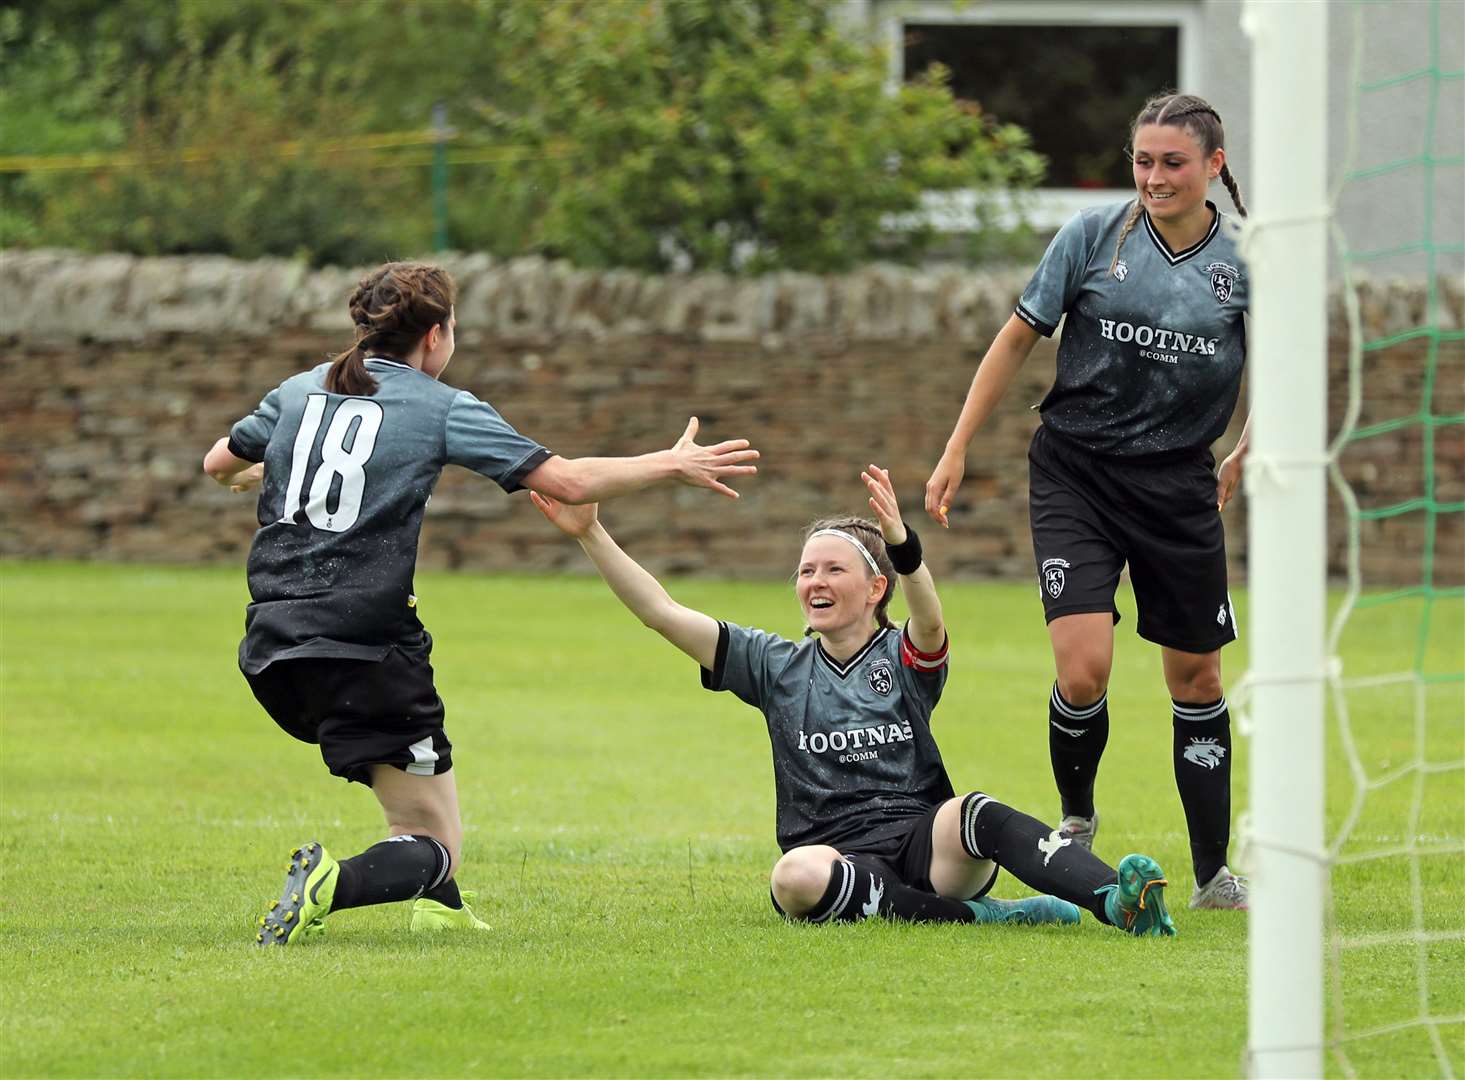 Captain Carly Erridge (sitting) celebrates with Sophie Kinghorn (left) and Sarah Henderson after scoring one of her two goals in the Highlands and Islands Cup semi-final against Sutherland. Picture: James Gunn